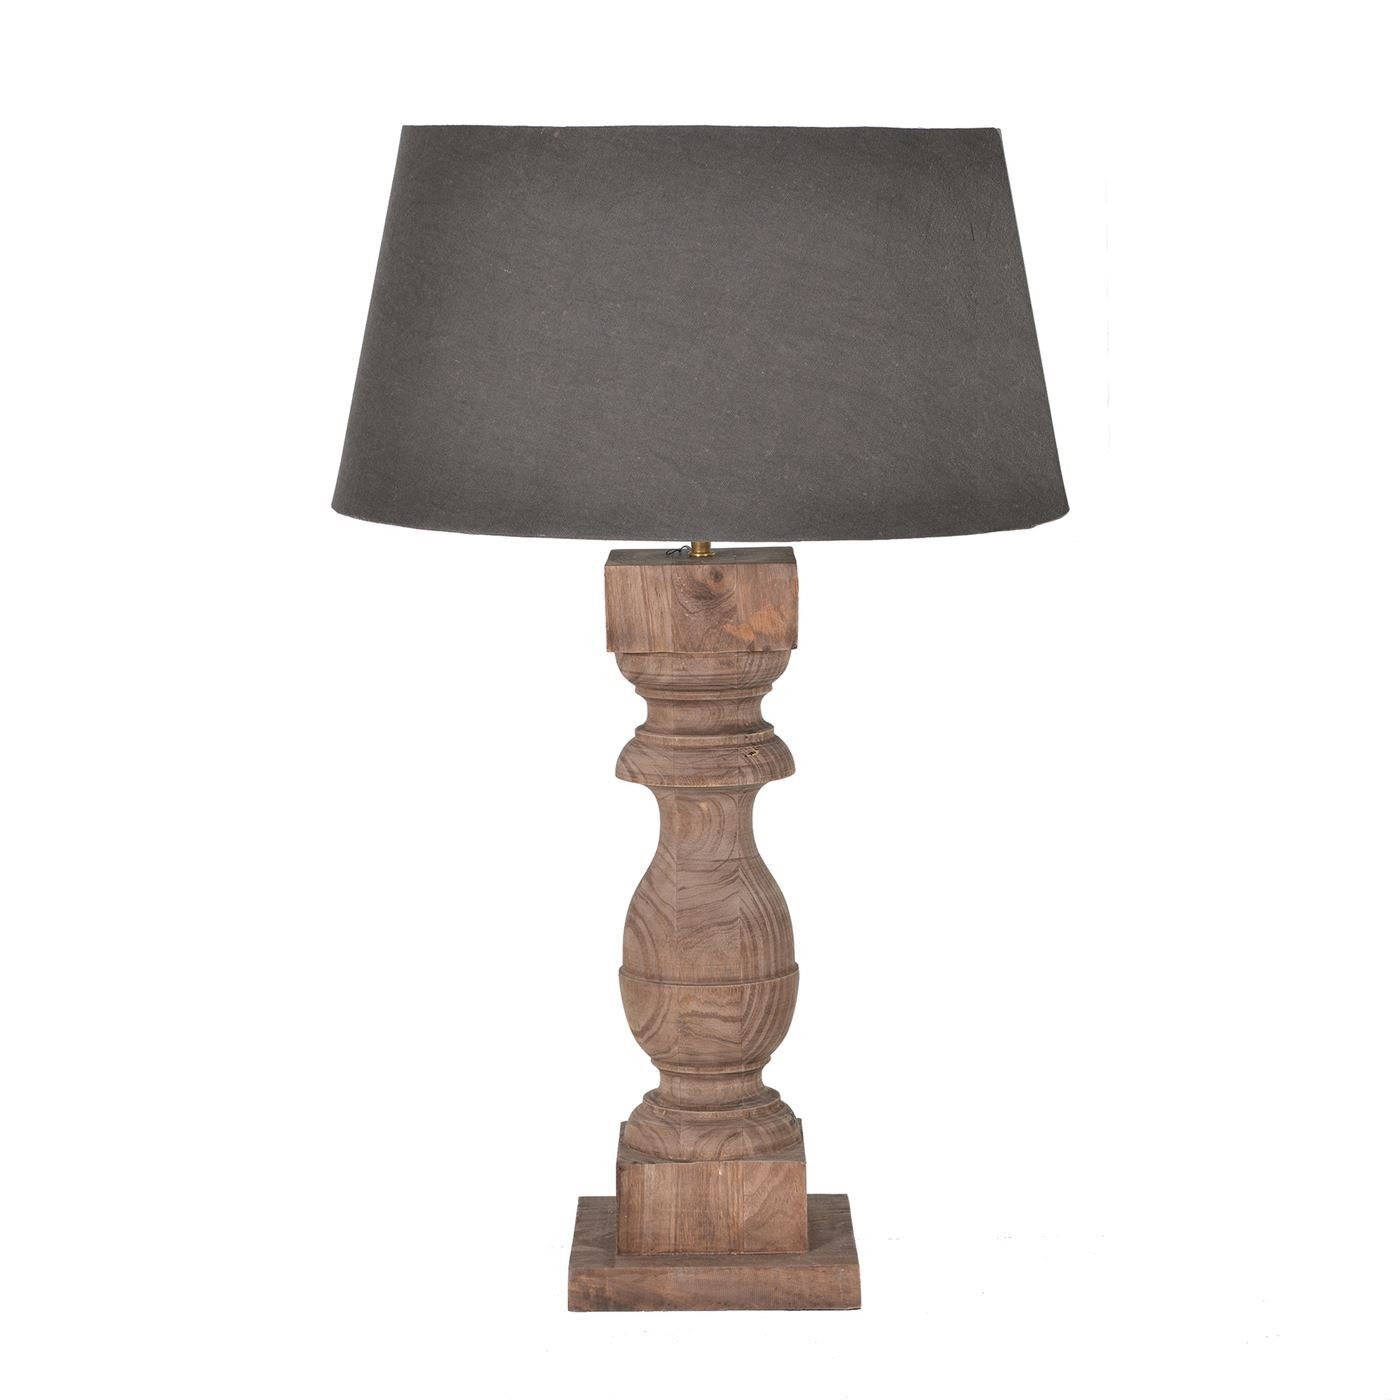 Weathered Wood Table Lamp, Neutral - Barker & Stonehouse - image 1